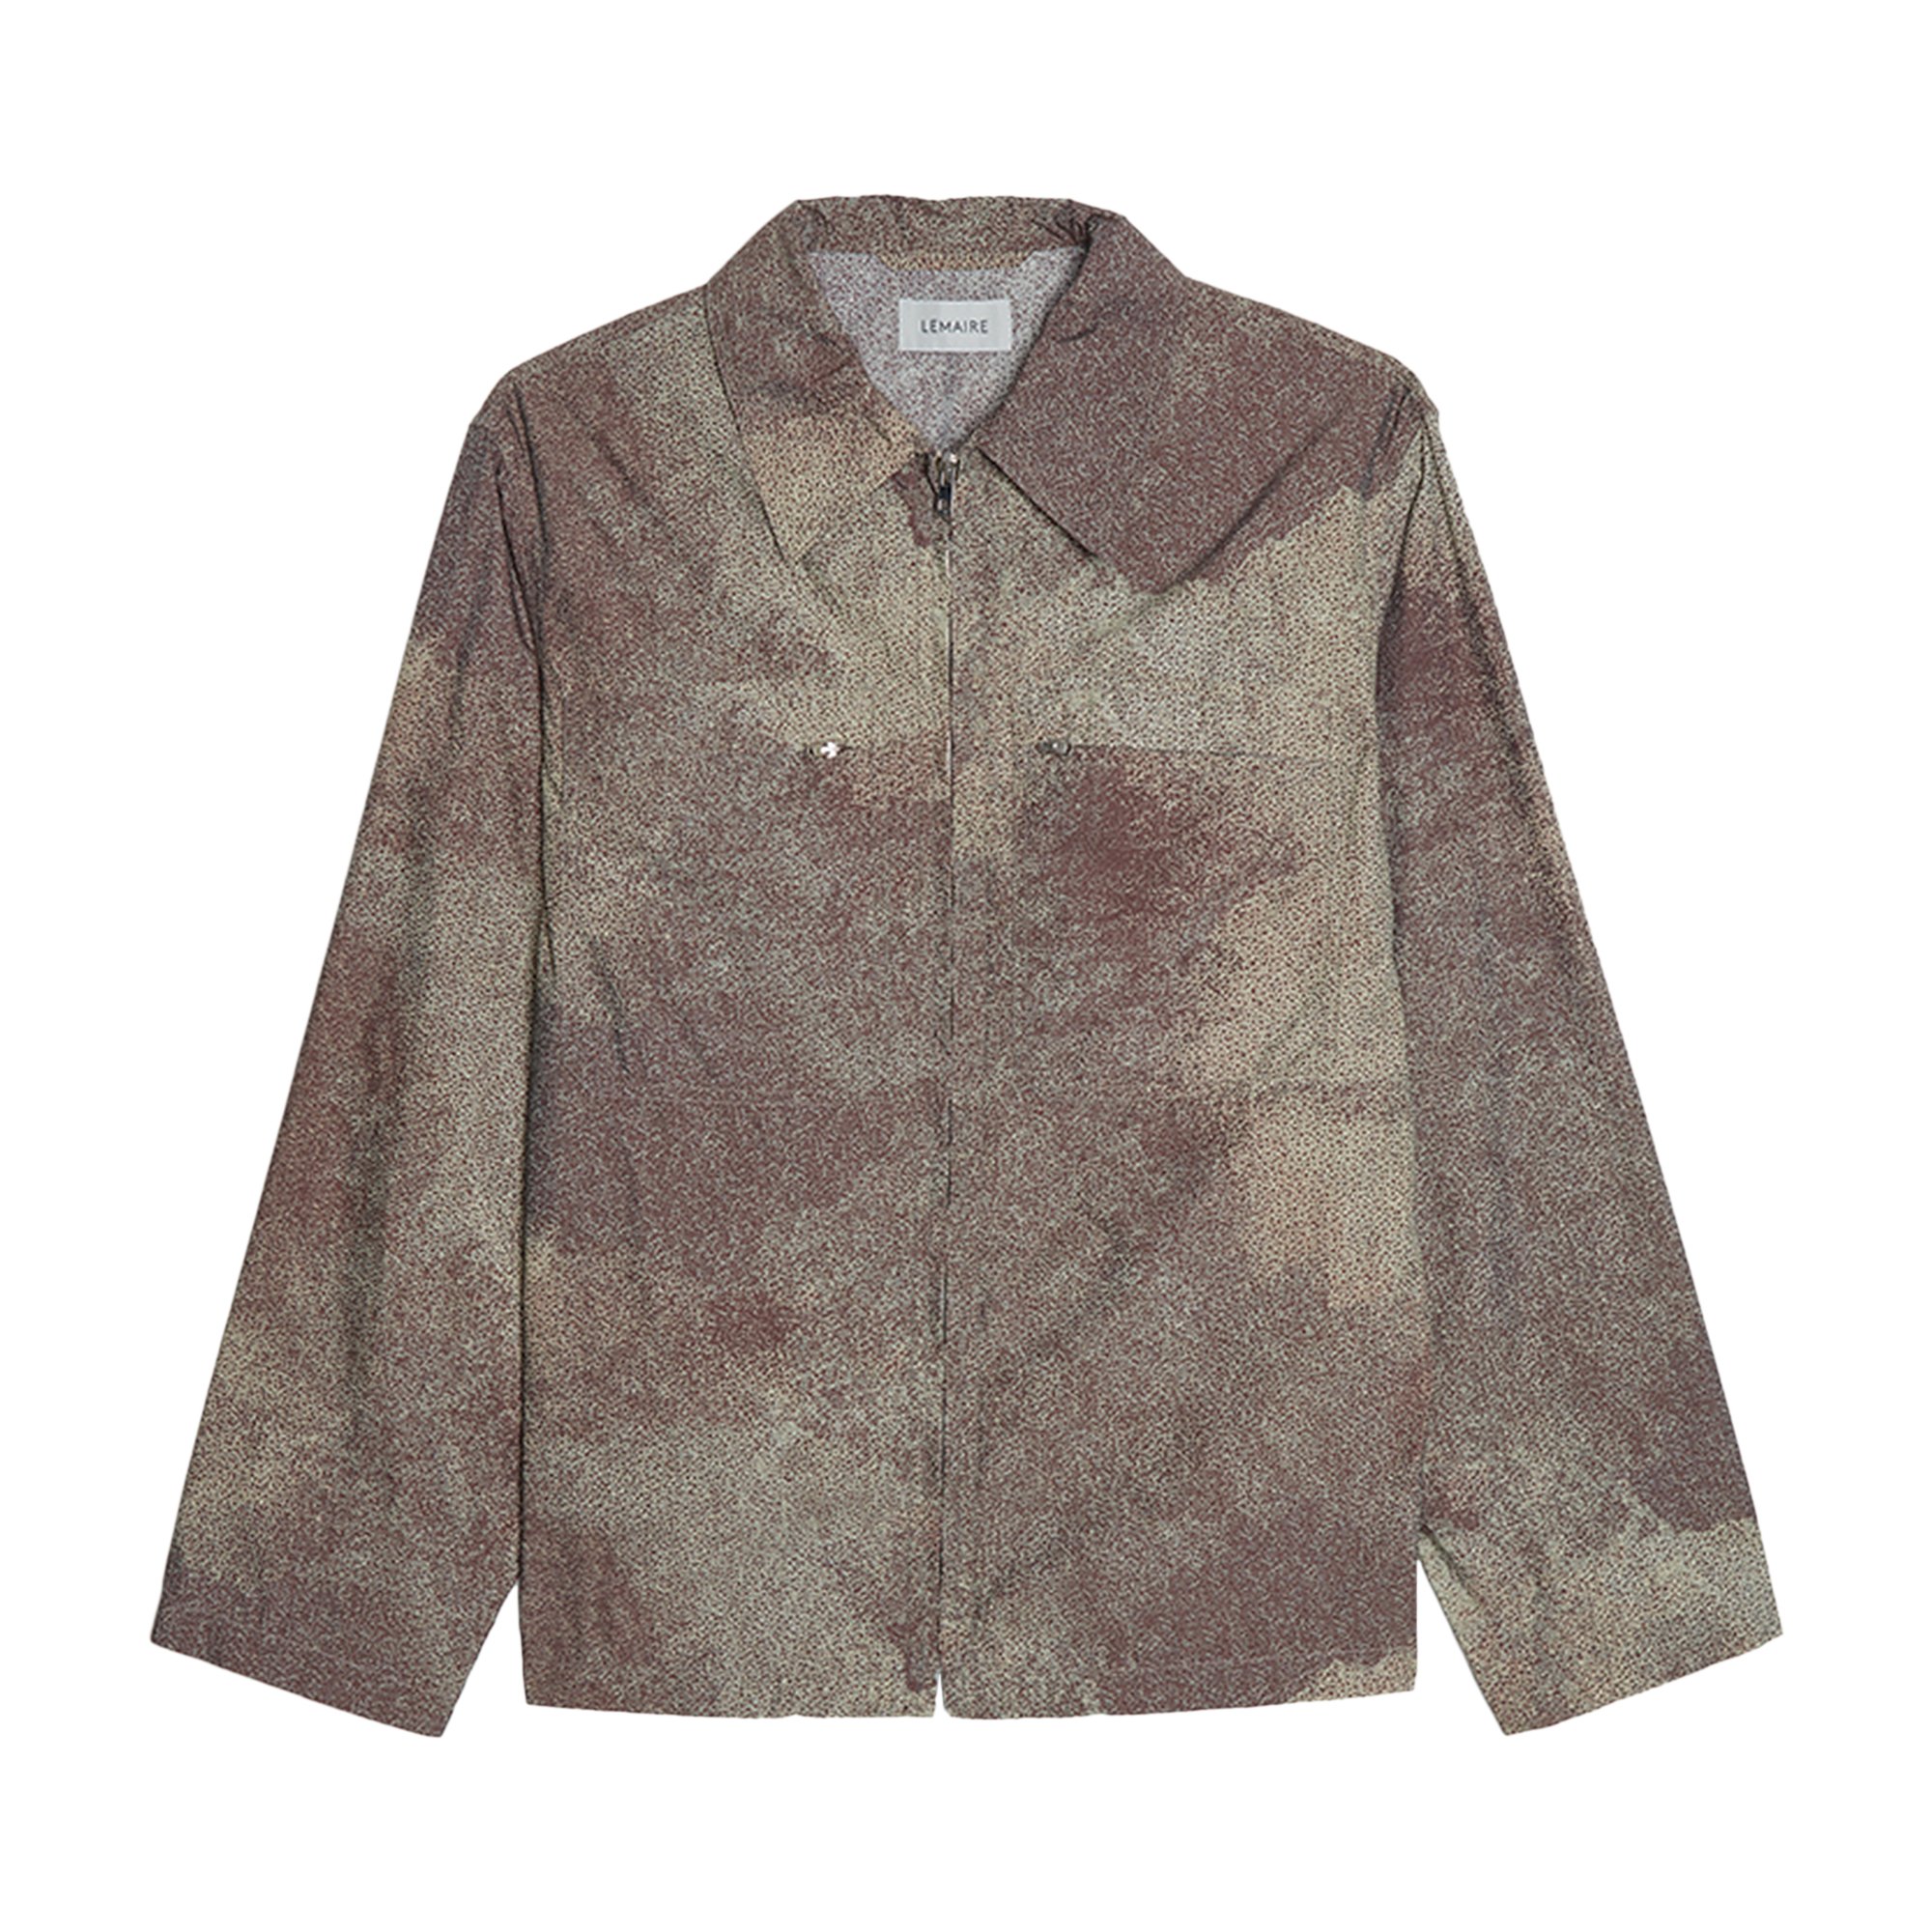 Buy Lemaire Printed Zipped Overshirt 'Peat/Overcast' - M 221 OW312